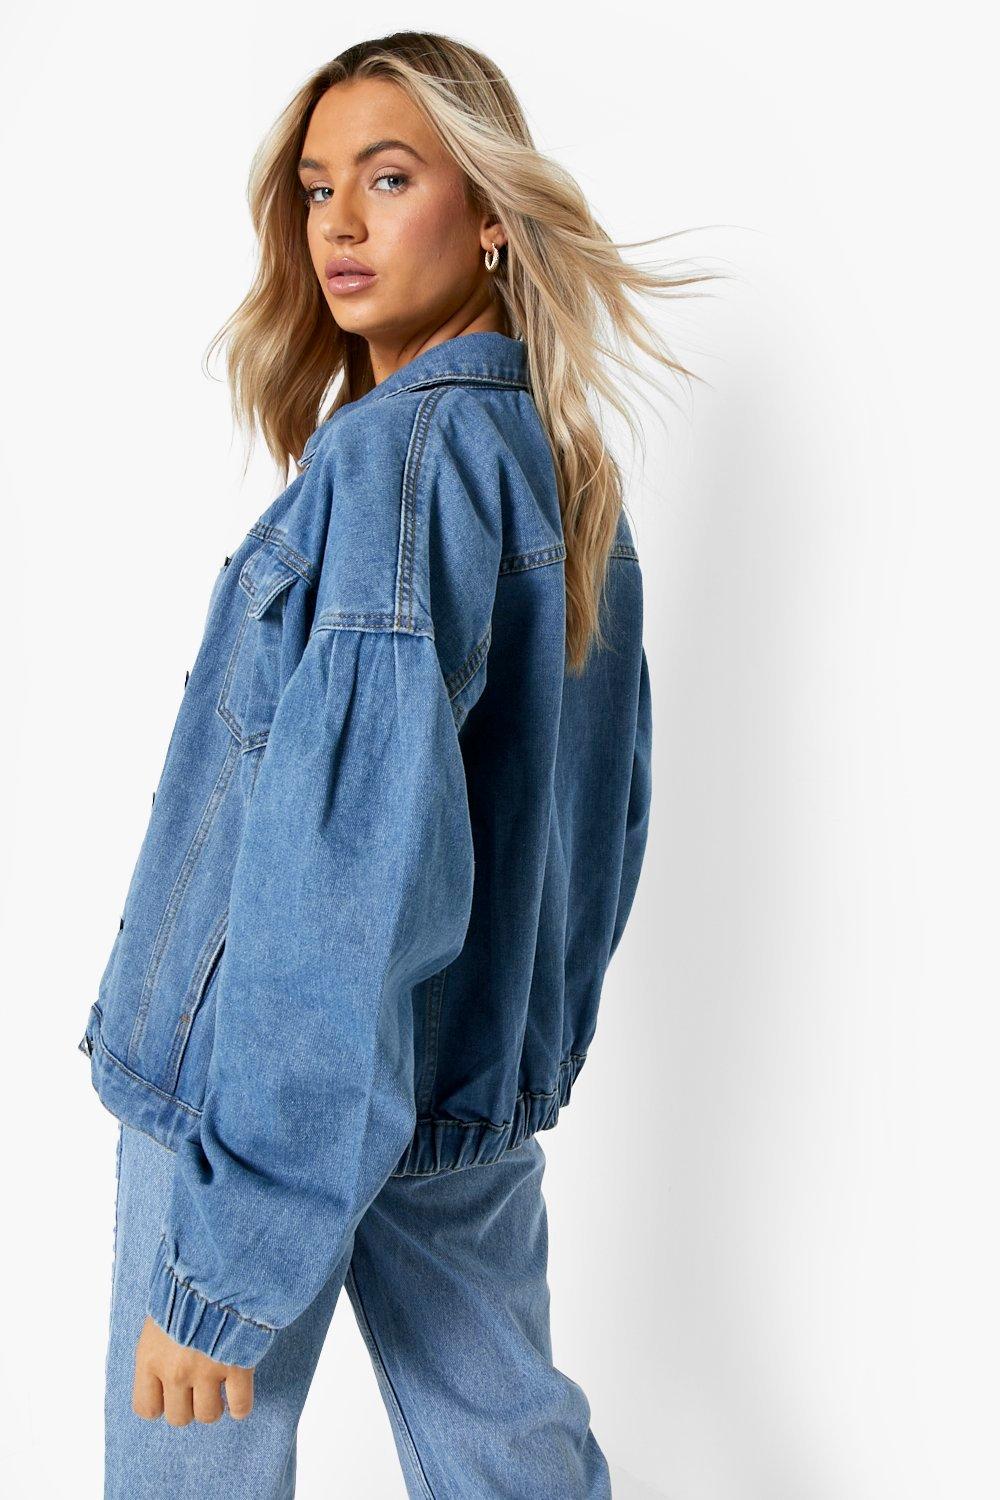 Blue Boohoo Cuffed Oversized Jean Jacket in Mid Blue Womens Clothing Jackets Jean and denim jackets 